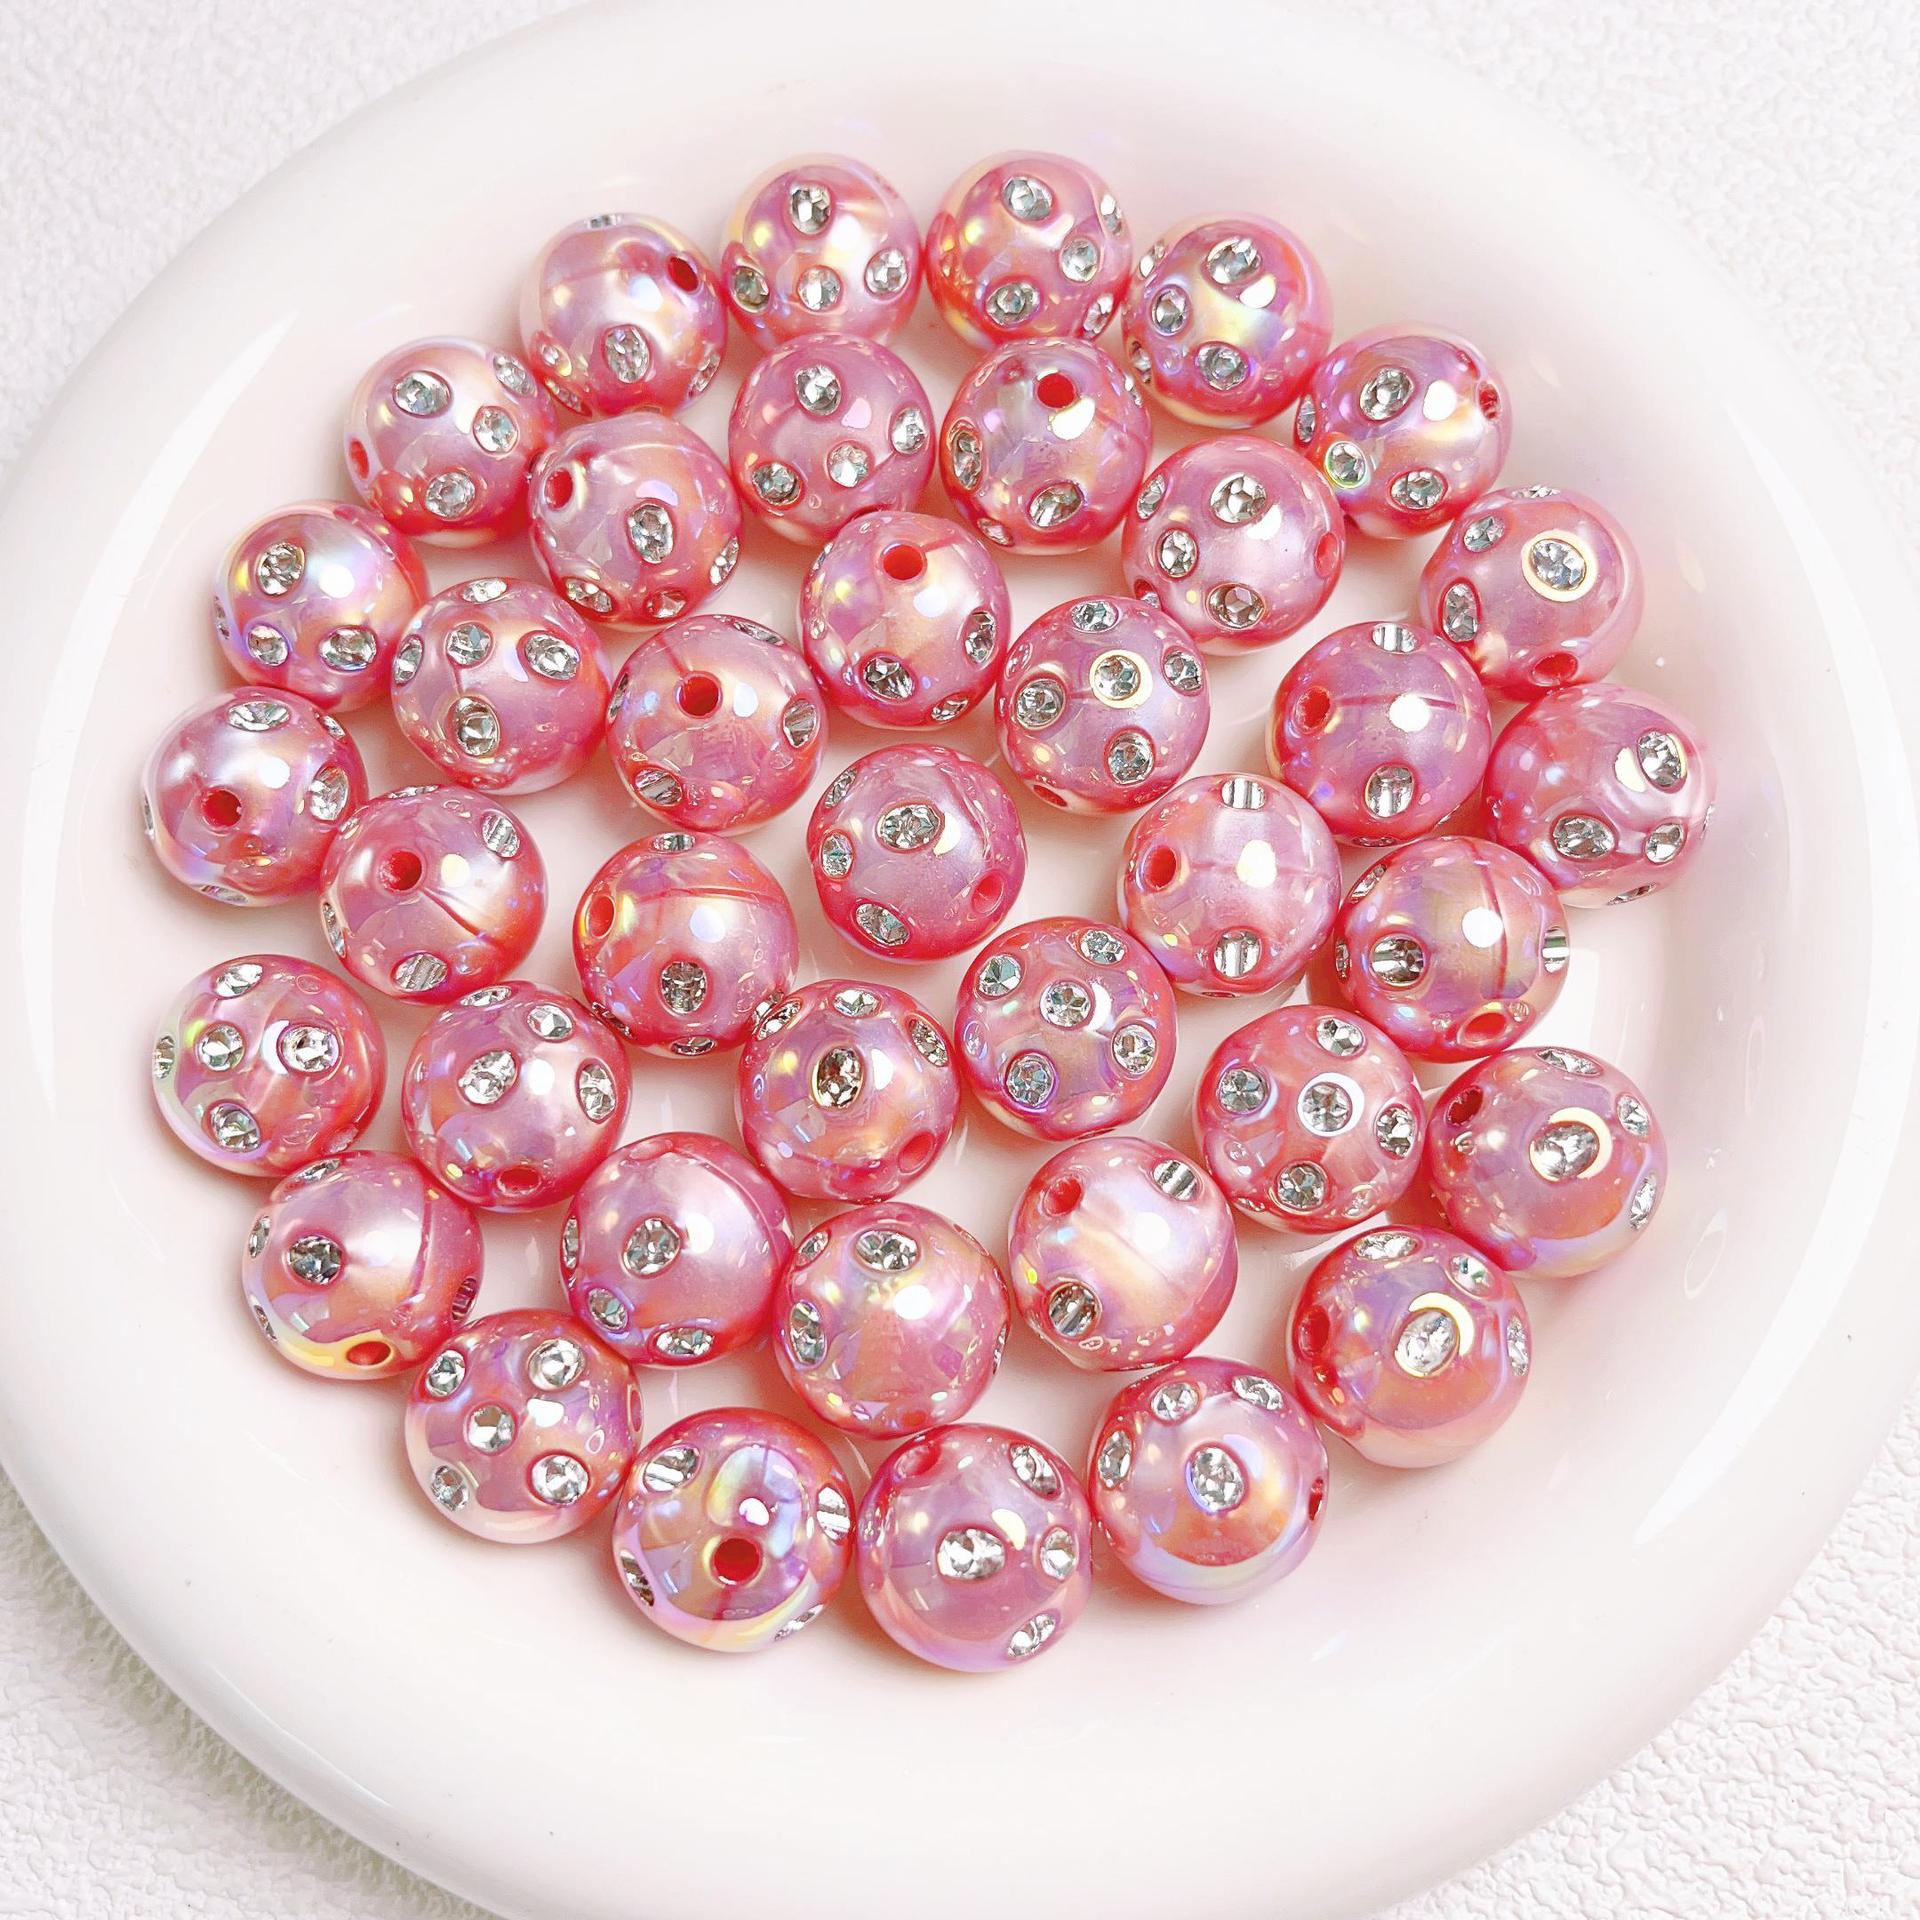 Wholesale of 10pcs 15mm Acrylic UV Plated Colored Diamond Round Bead DIY Beaded Pen Accessories ACC-BDS-JFei004